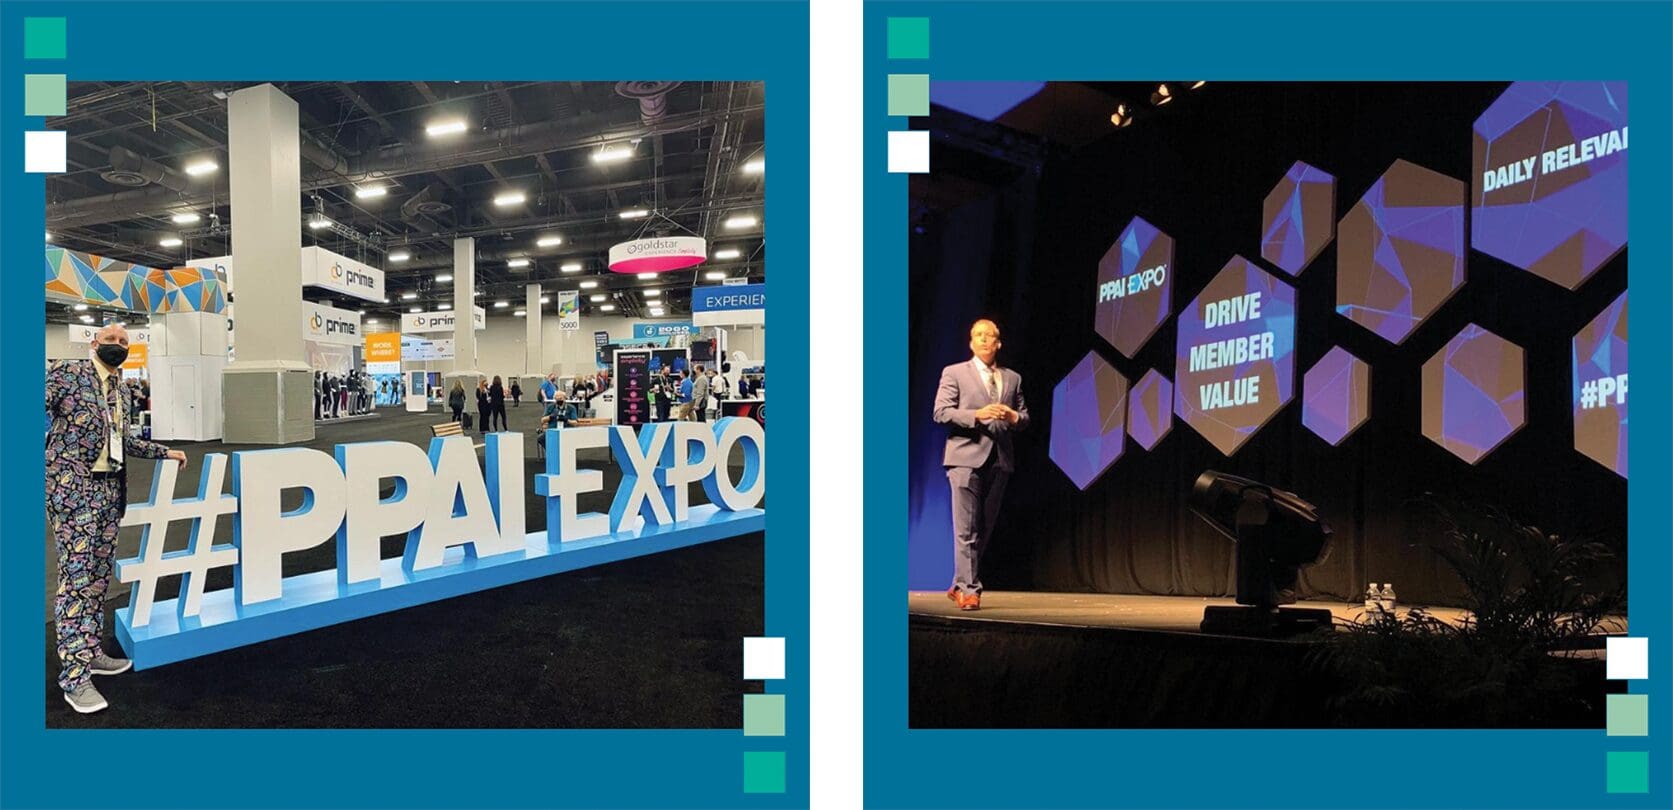 One image features a man standing in front of a #PPAIExpo sign. Another image features a man giving a lecture at PPAI Expo 2022.